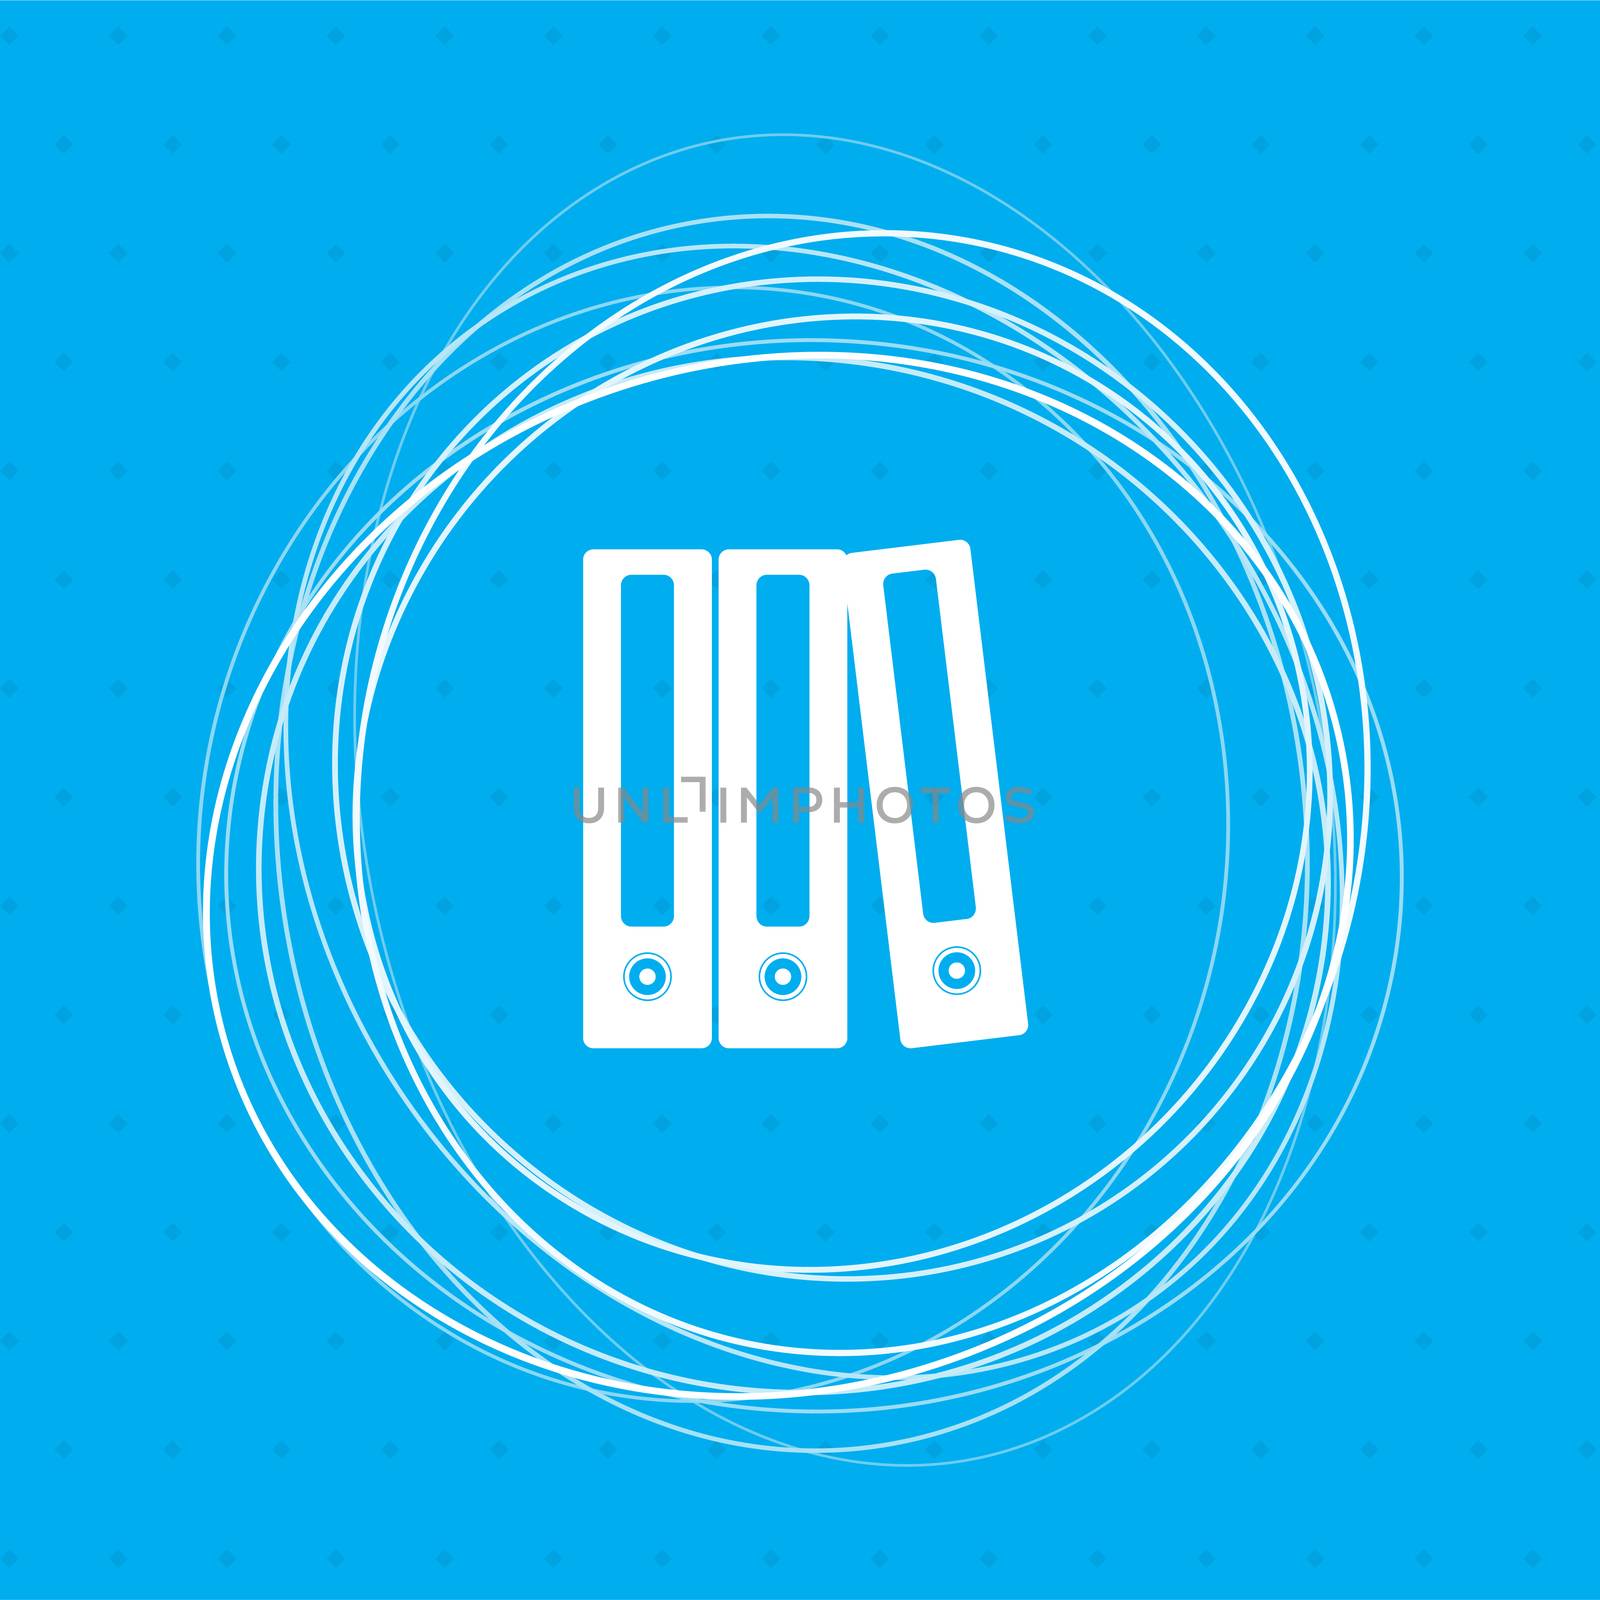 Folder icon on a blue background with abstract circles around and place for your text. illustration